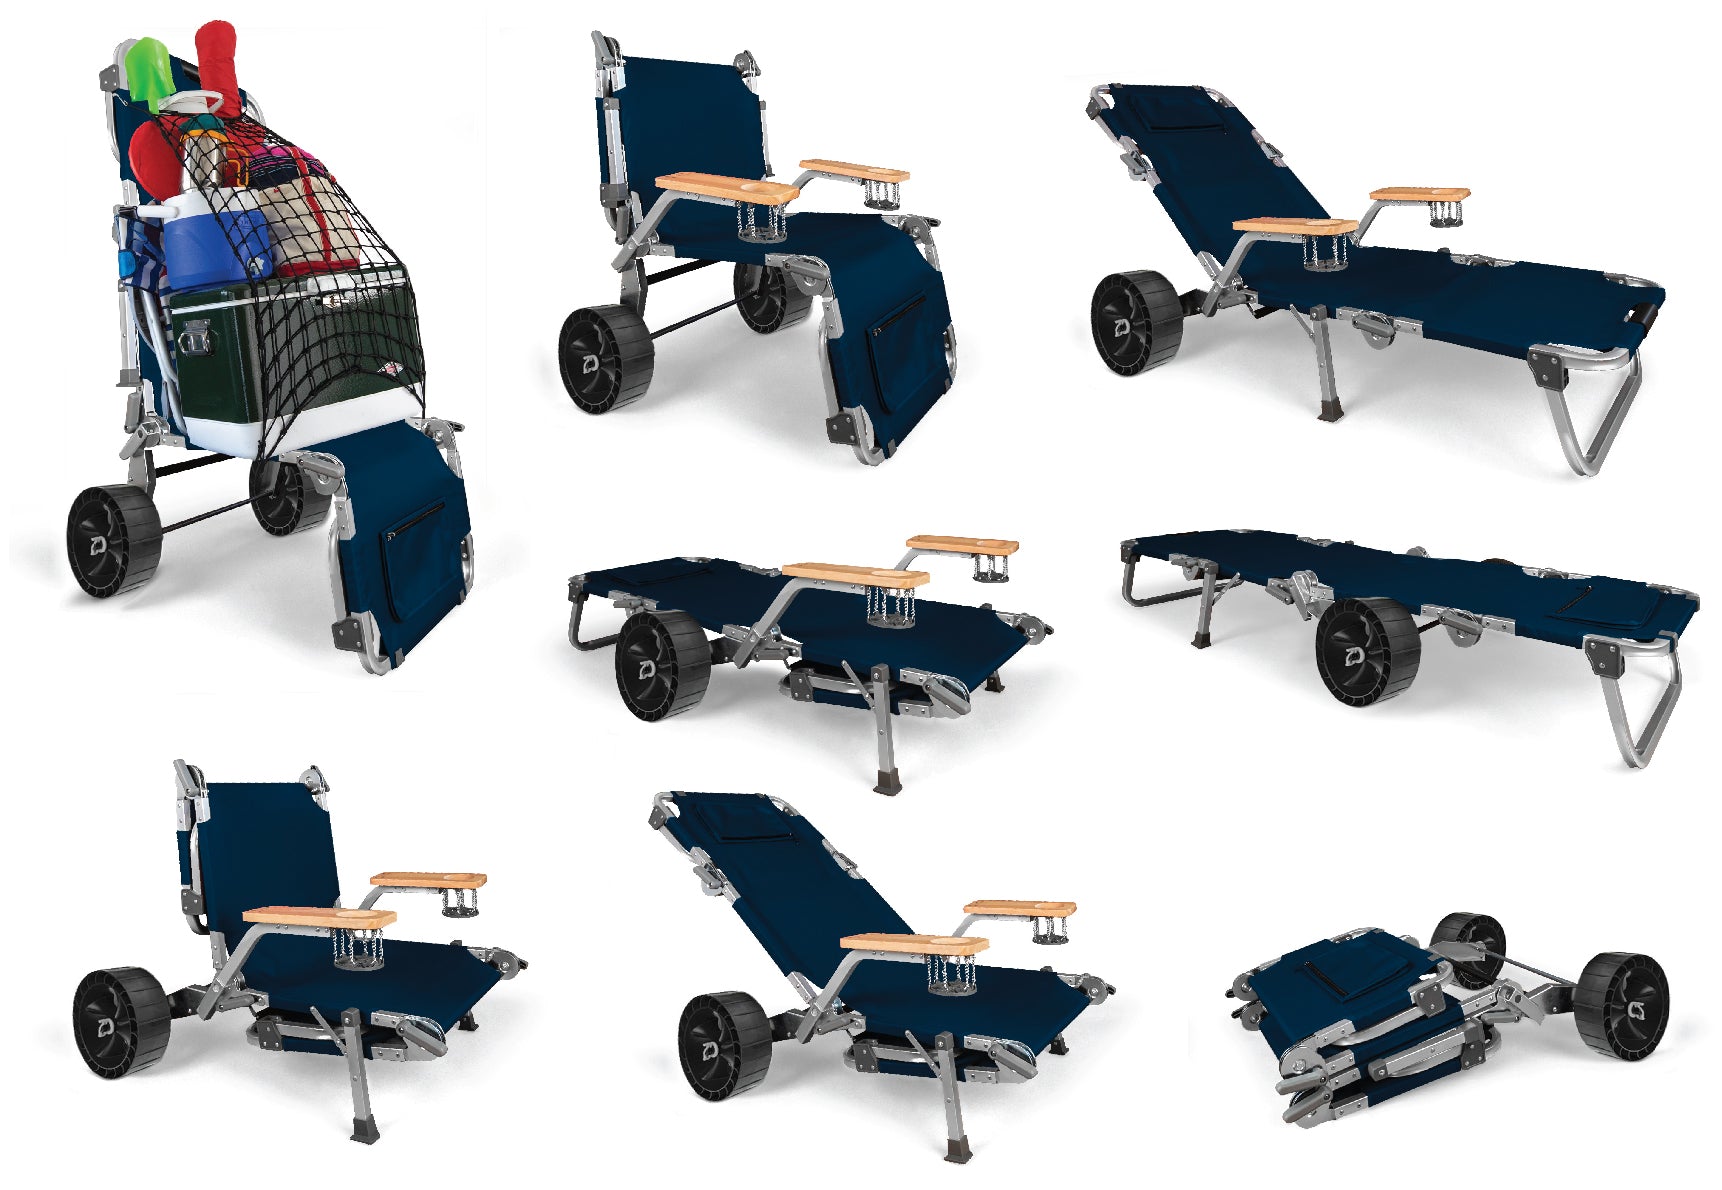 Beach Wagon Folding with Large Sand Wheels Heavy Duty Collapsible Cart with Patent Pending Beach Chair Holder Great for Ocean, Camping and Fishing –